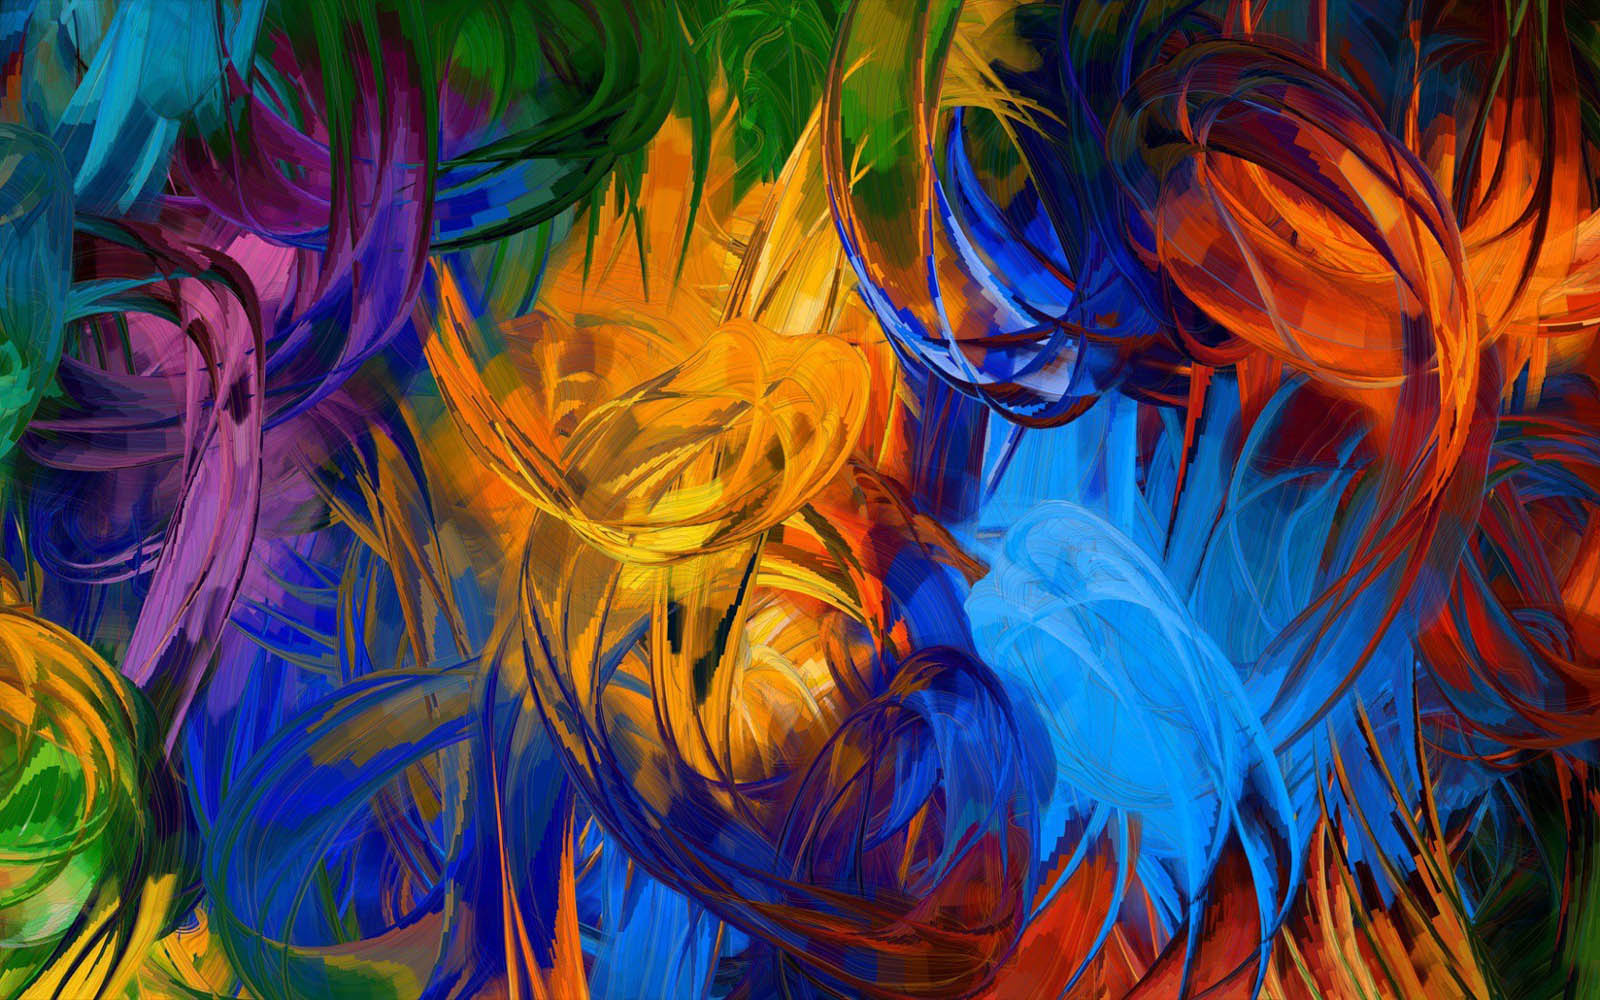  Abstract Paintings Wallpapers AbstractPaintings Desktop Wallpapers